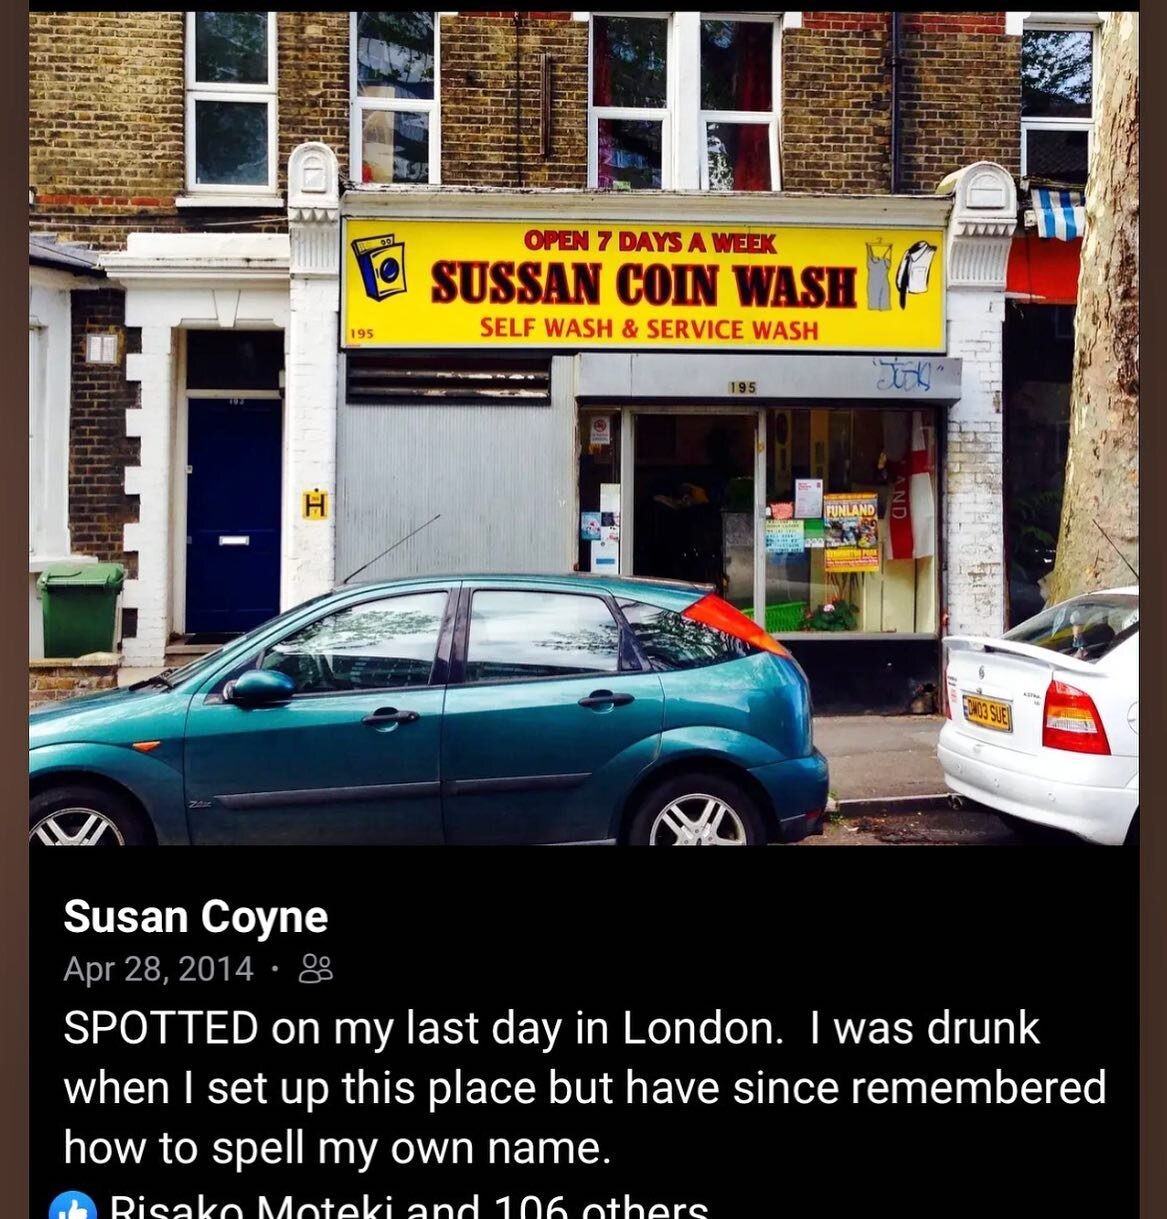 Happy Sussan Coin Wash Day! Sneaks up on you every year, don&rsquo;t it? As always, thanks to A. Lim for pointing it out to me all those years ago in Elephant and Castle, London. Also amazed that a mere nine months spent in London inured me to the ob